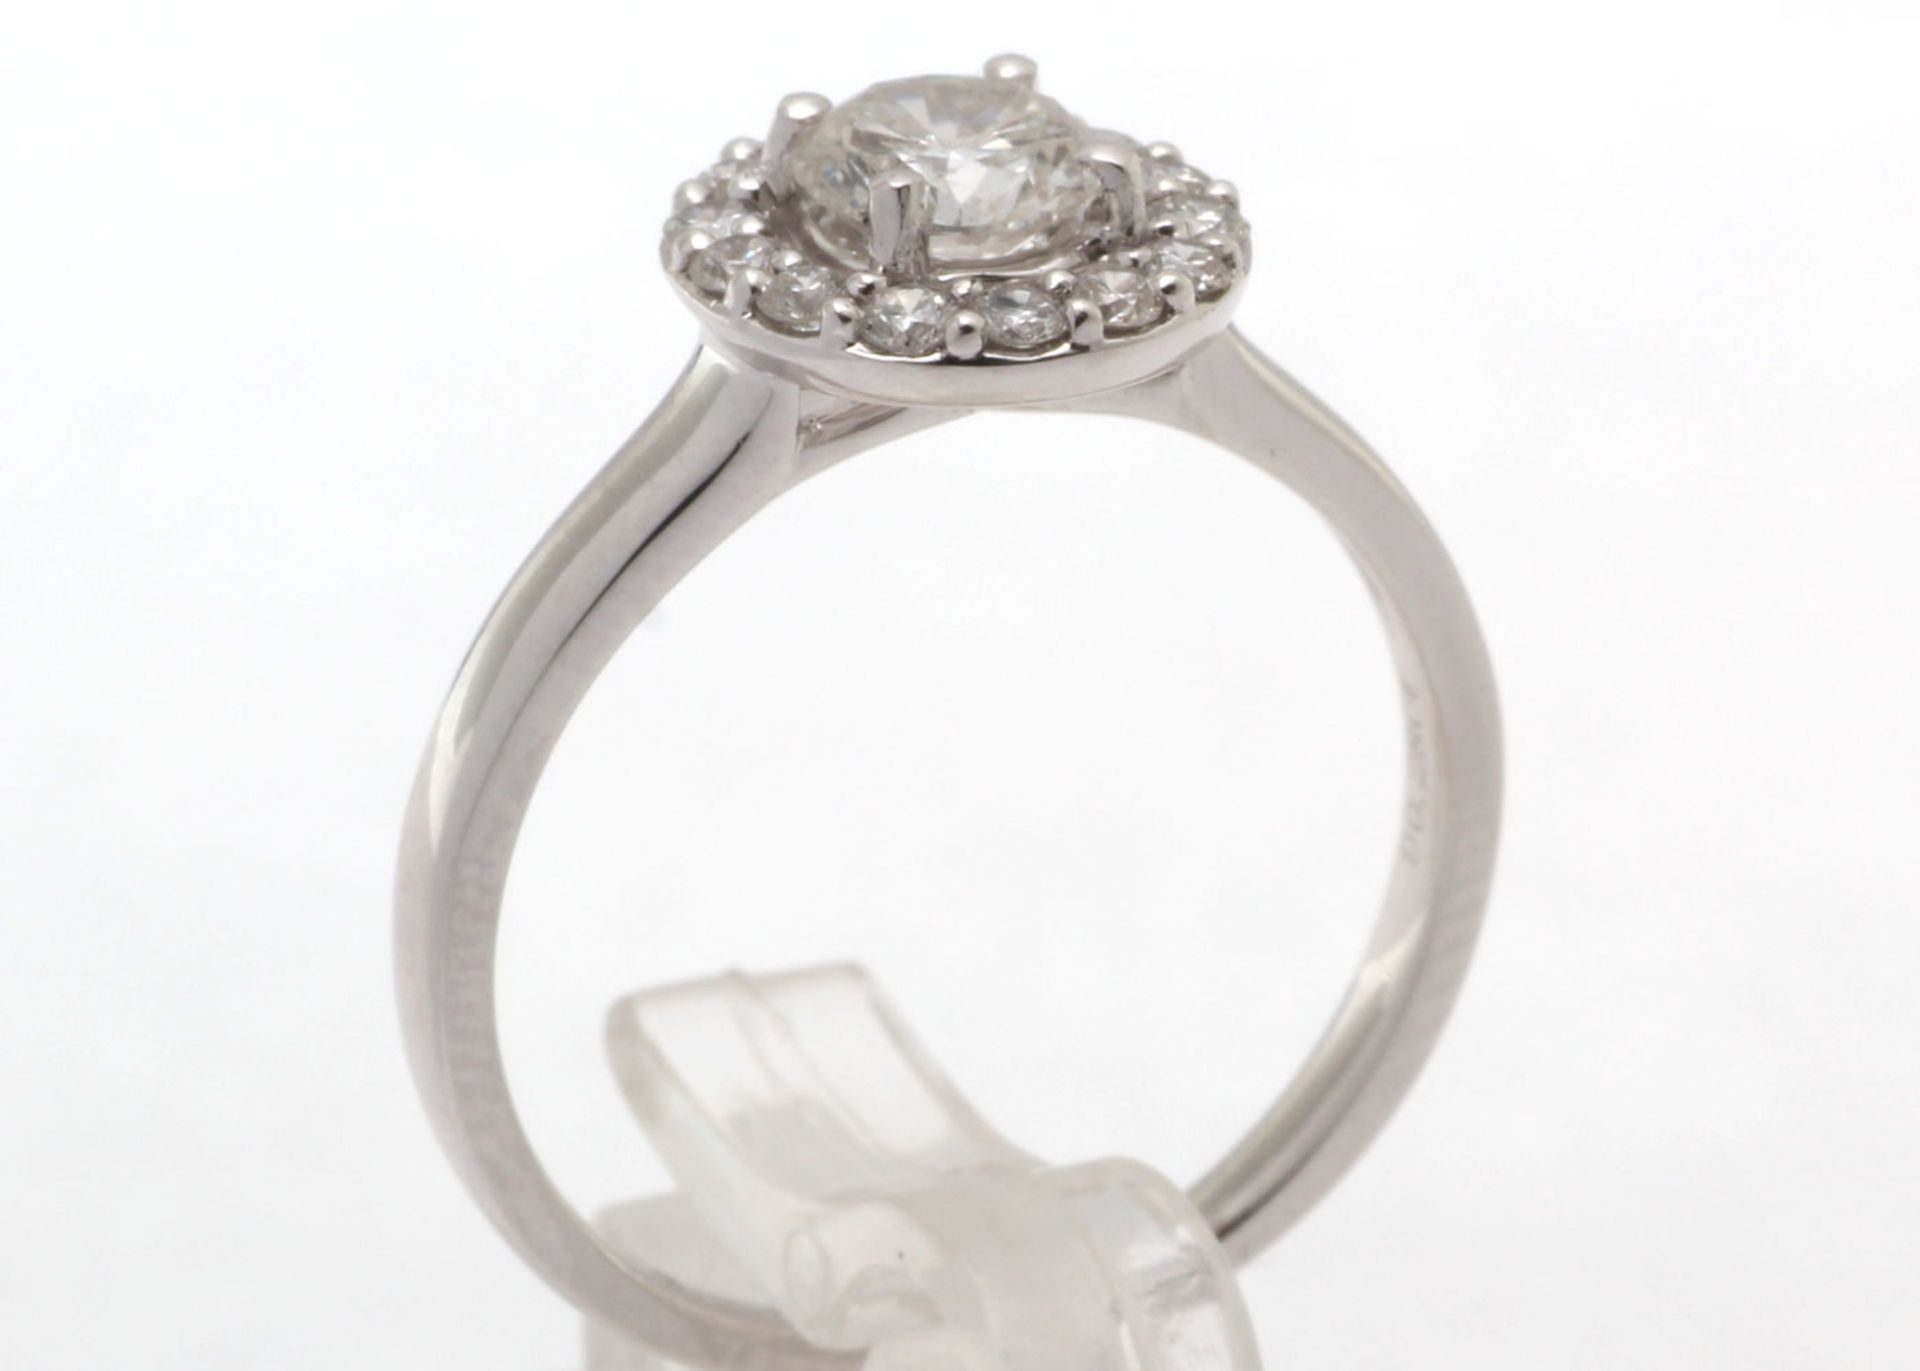 18ct White Gold Single Stone With Halo Setting Ring (0.58) 0.86 Carats - Image 5 of 9